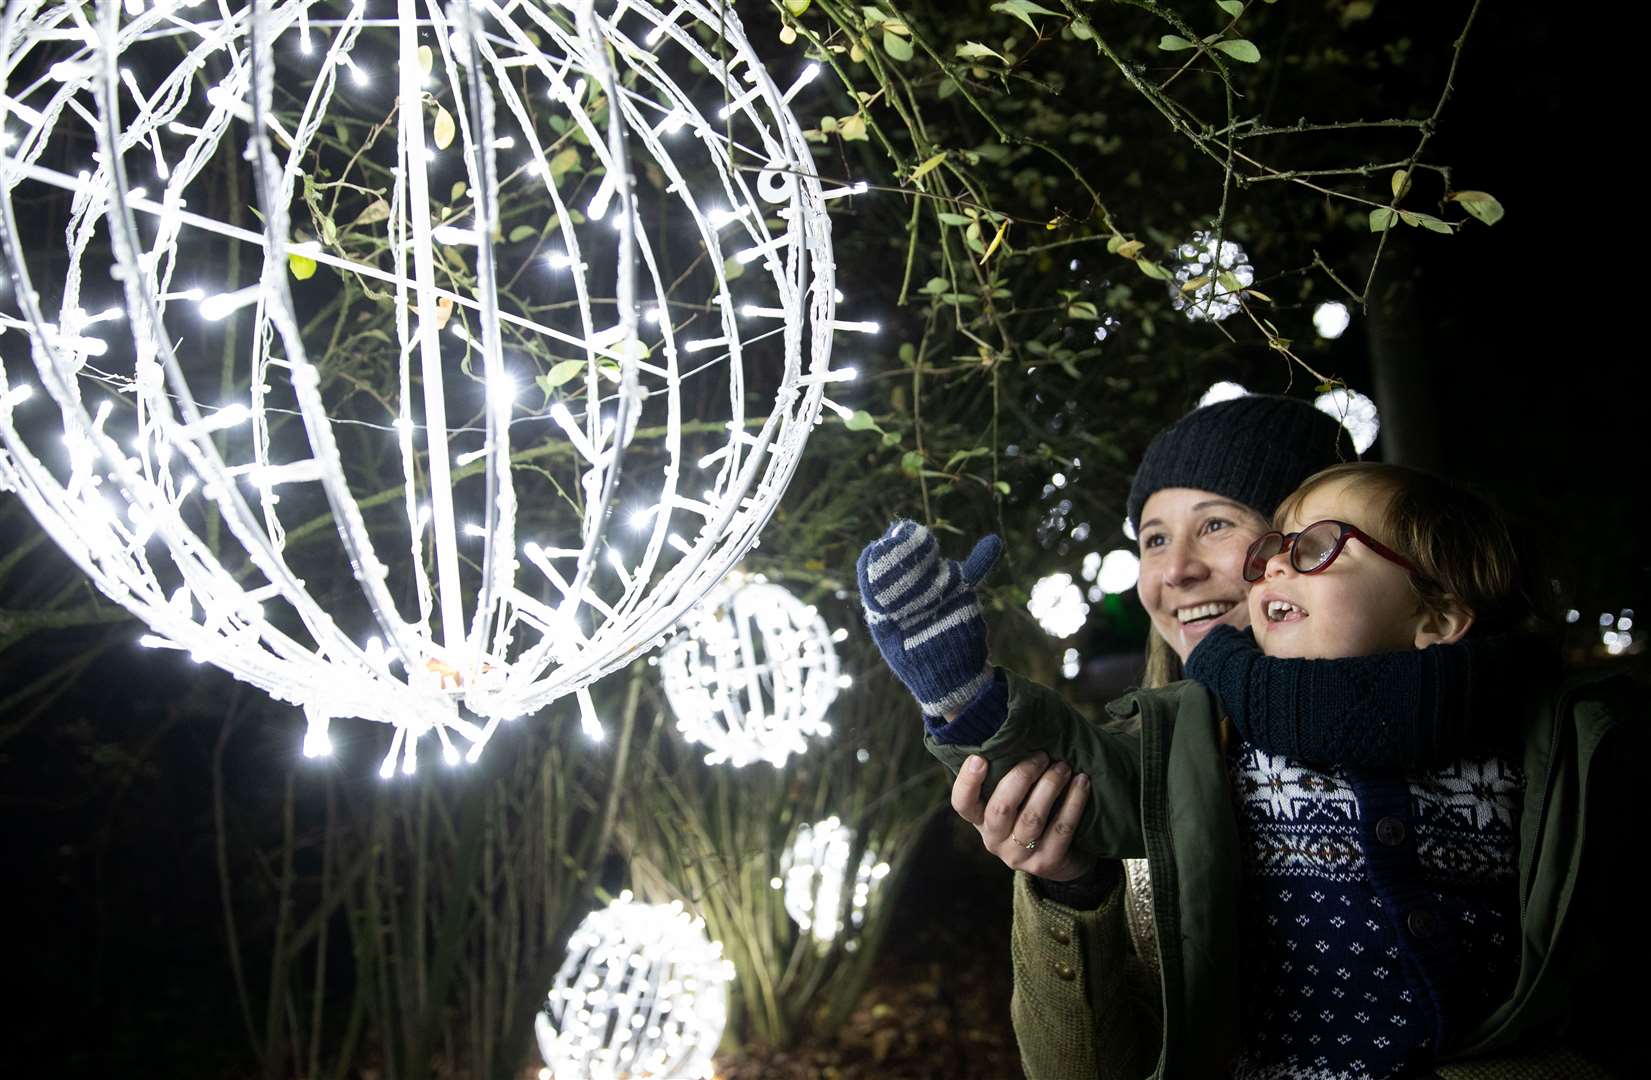 Maria Del Pilar Mira Ponton and her son Alfred Alejandro Dudely-Mira look at a lantern hanging from a tree (Andrew Matthews/PA)